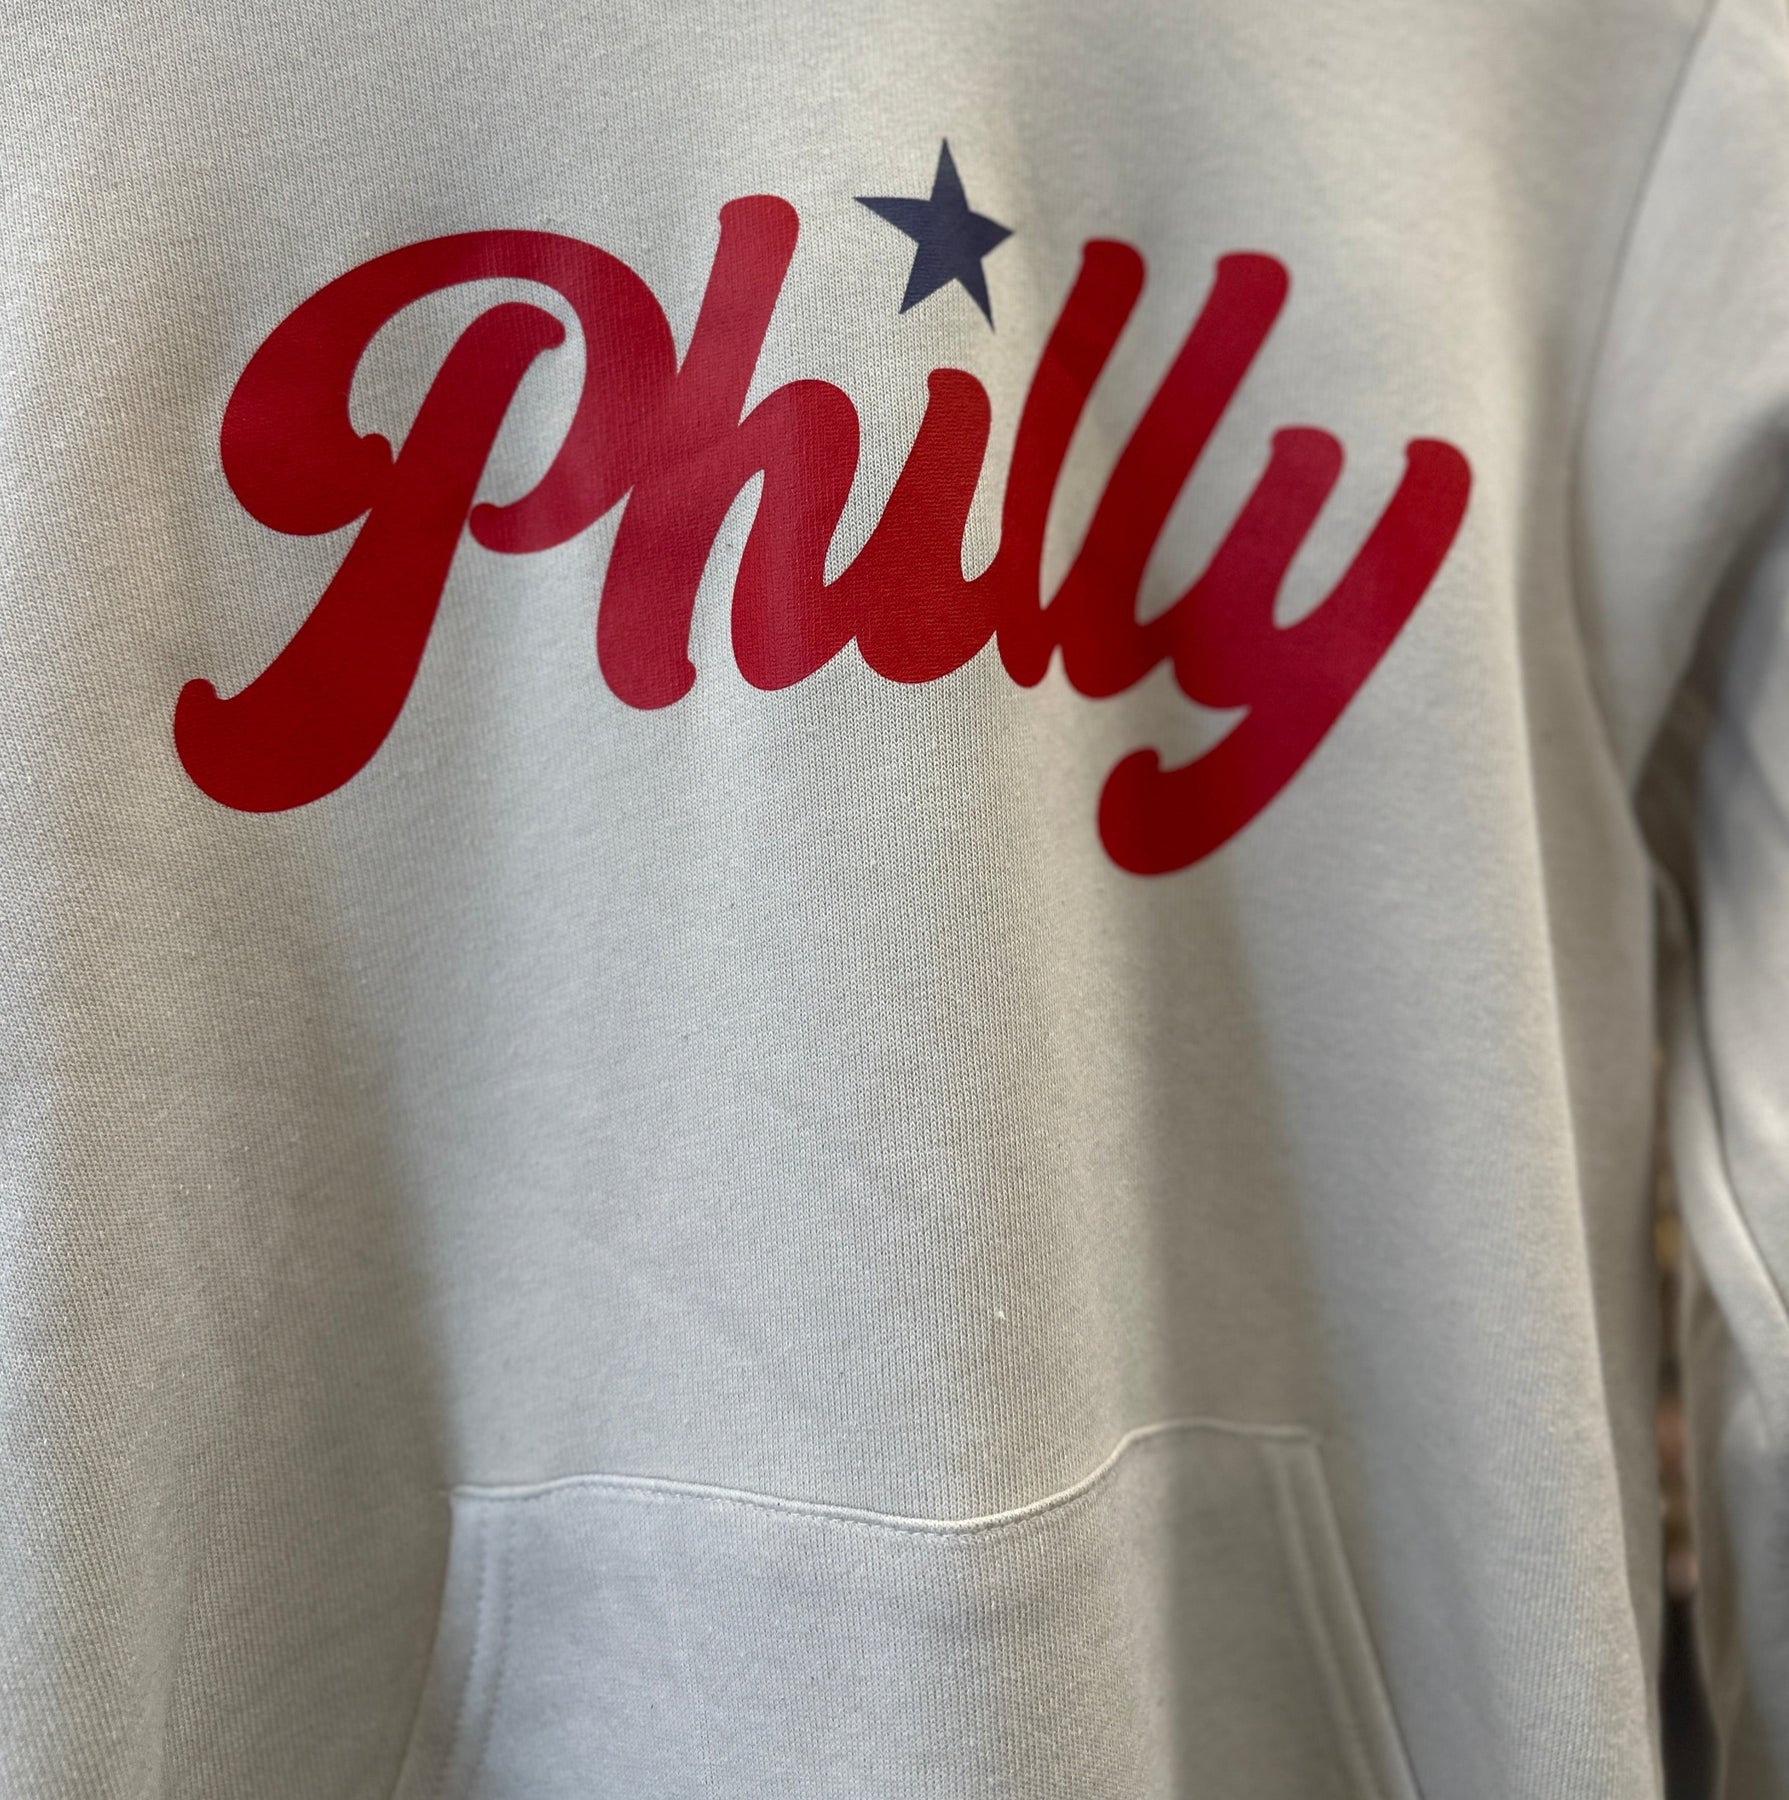 Philly Star Hoodie